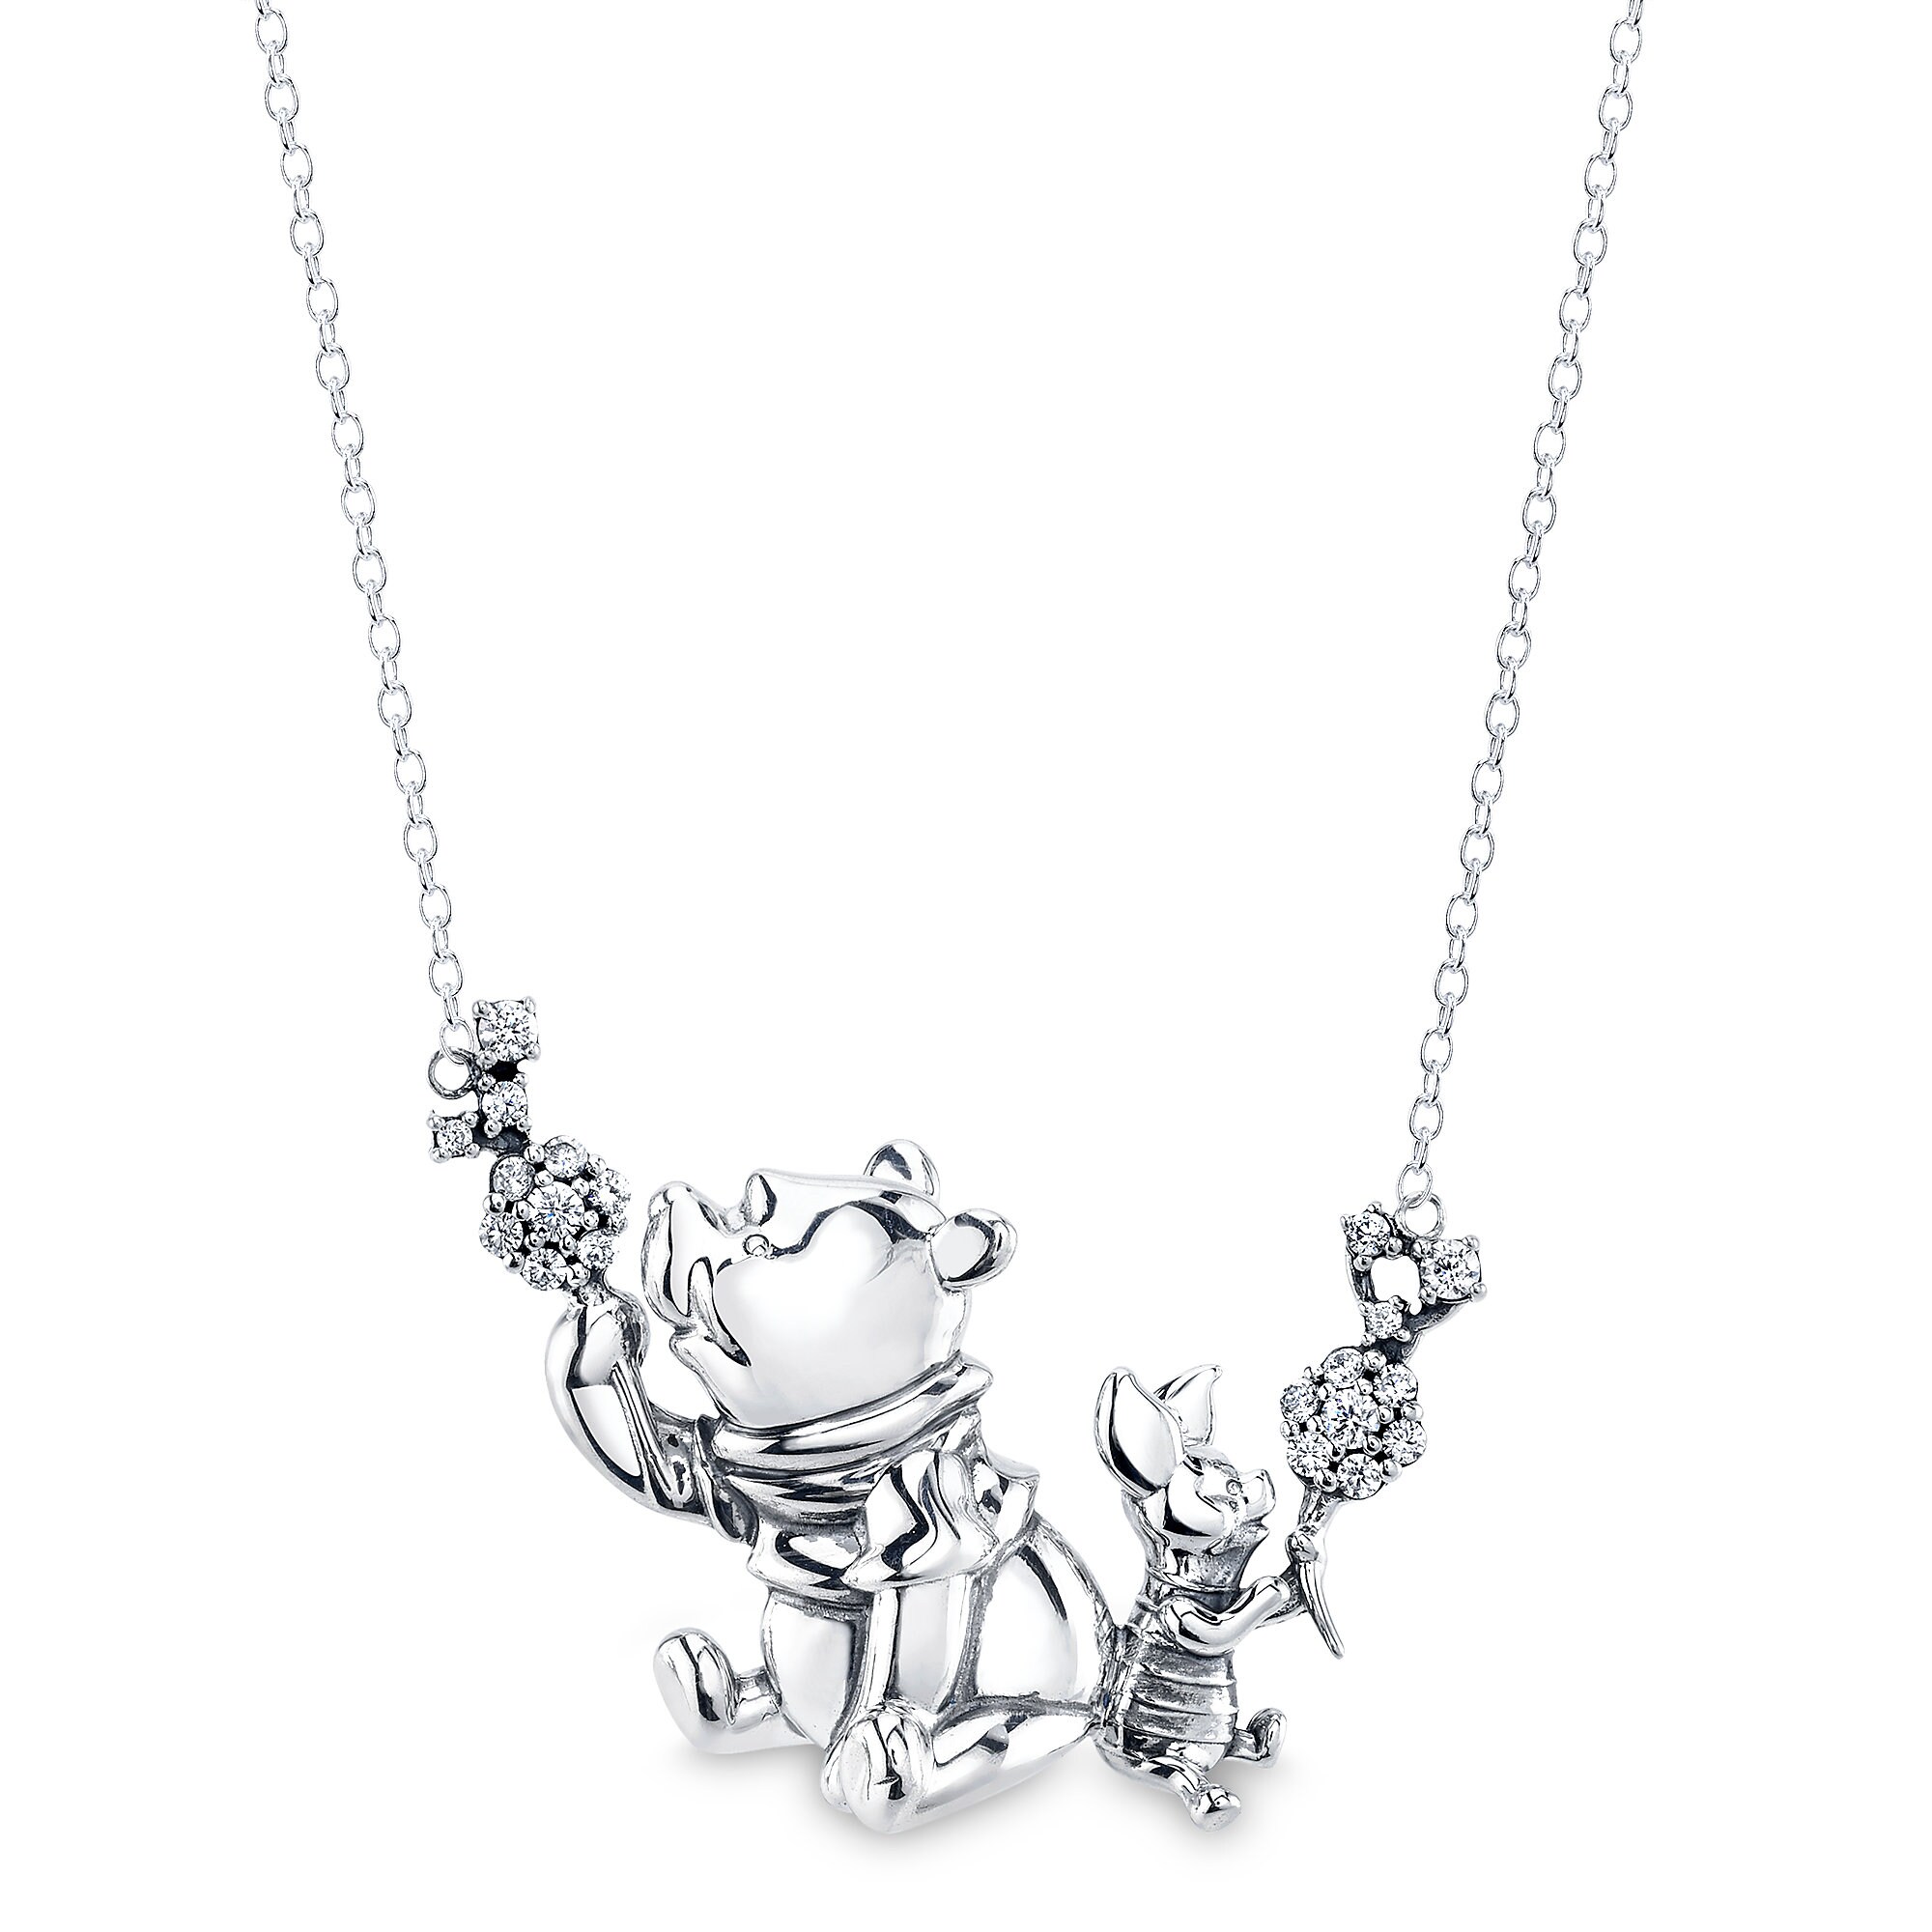 Winnie the Pooh and Piglet Necklace by RockLove - Christopher Robin